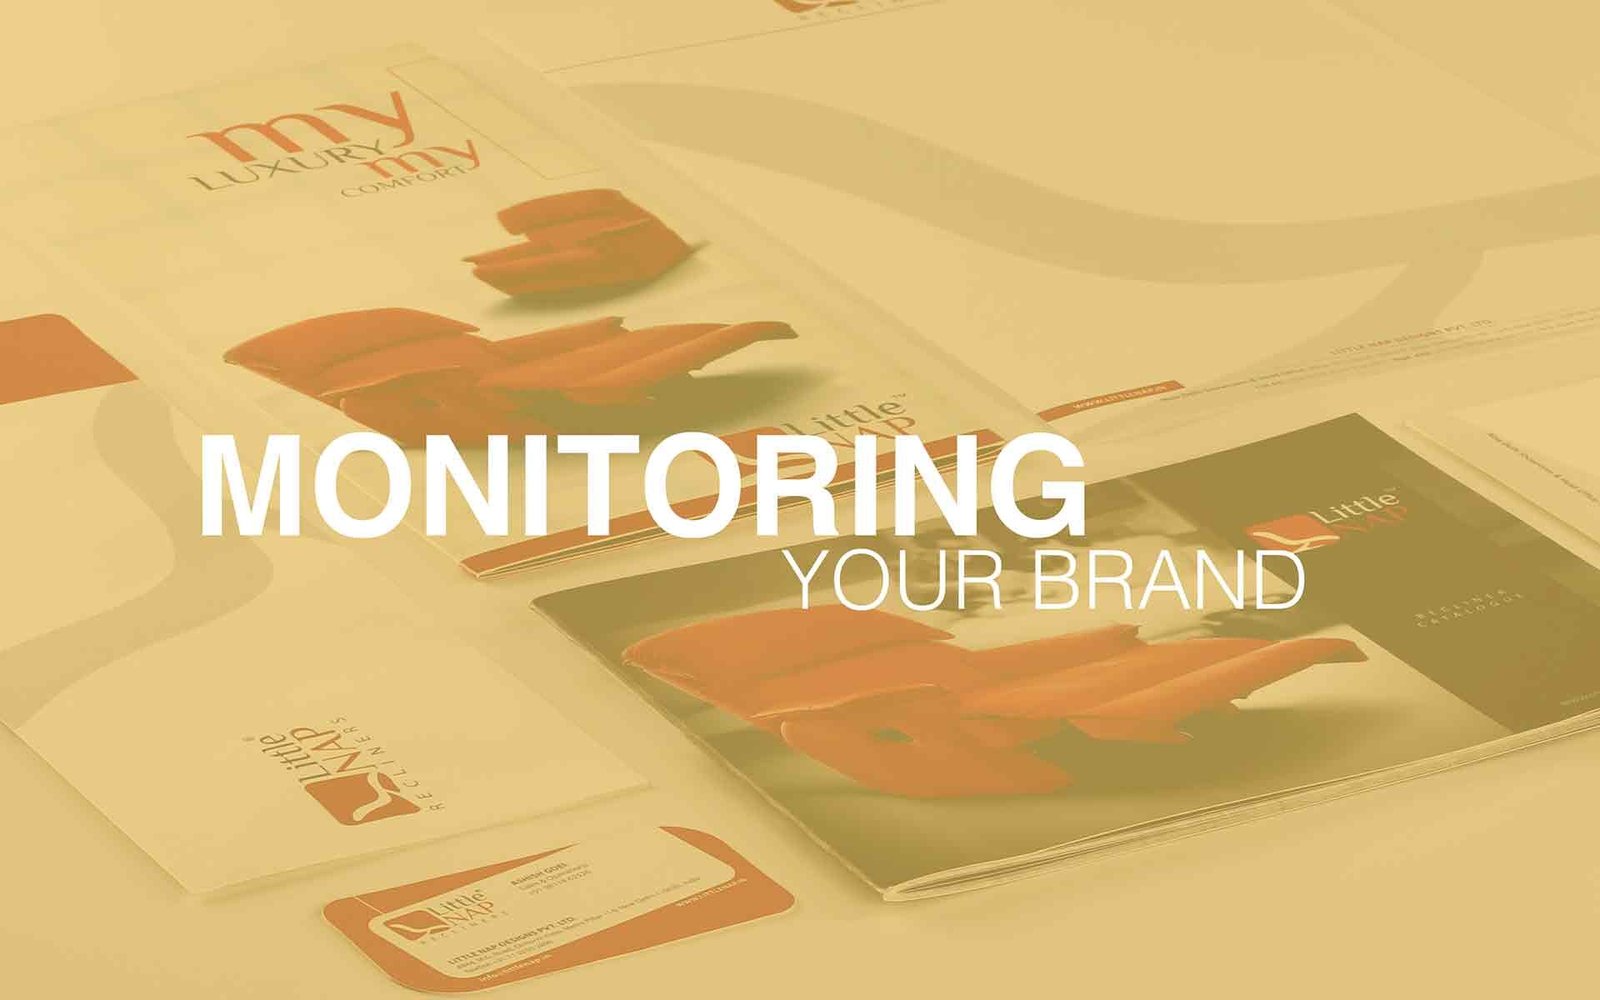 How To Monitor Your Brand